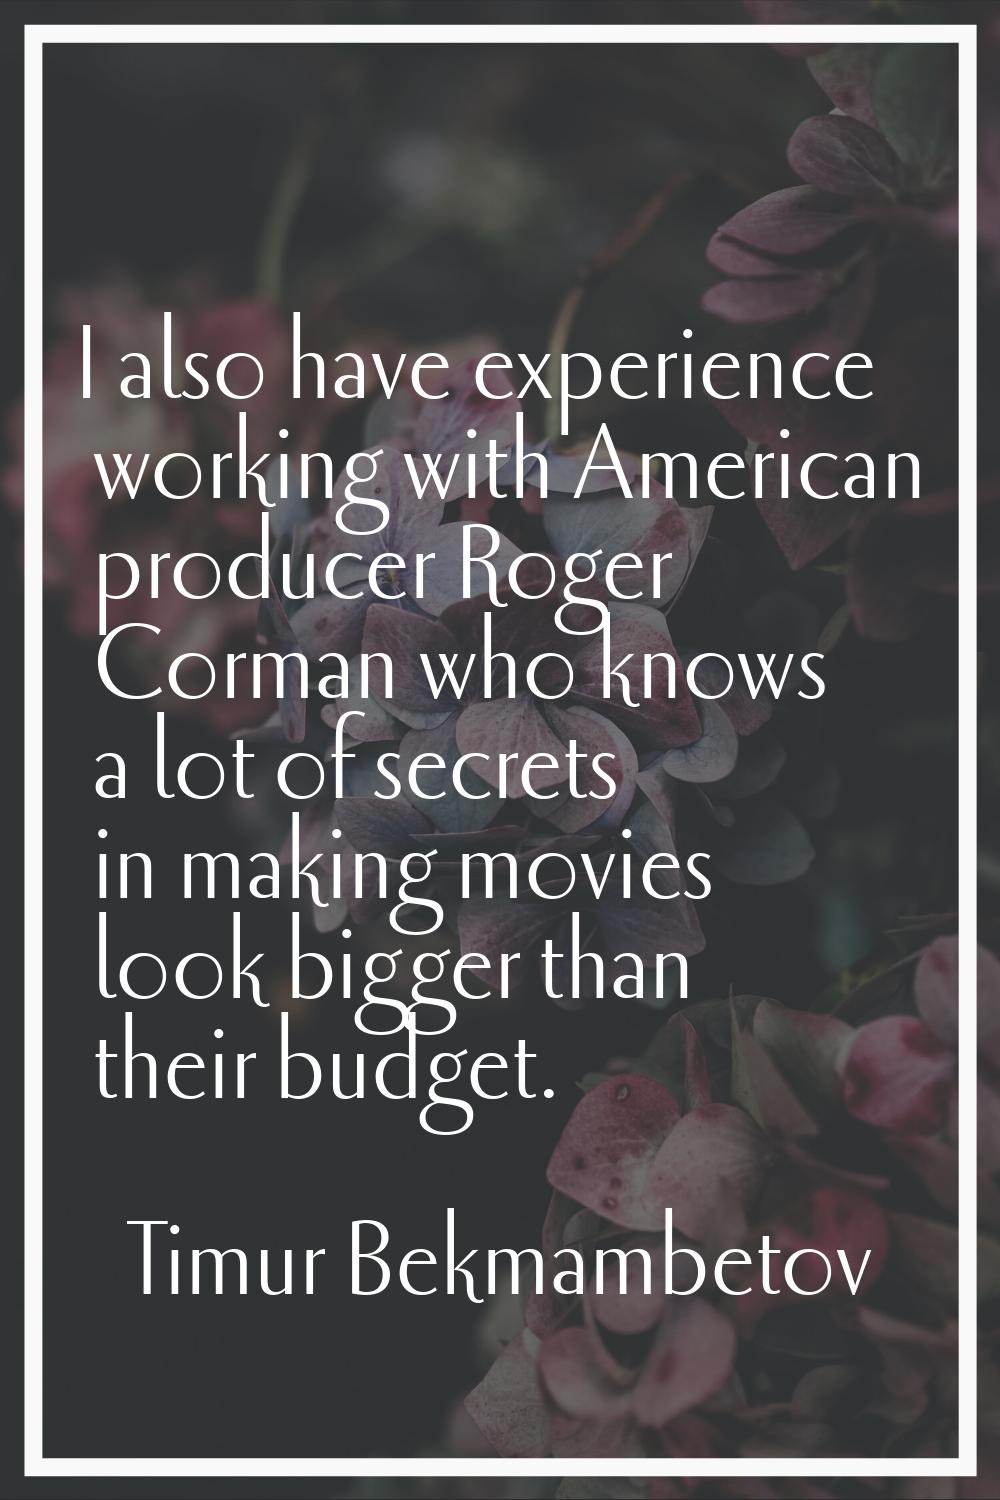 I also have experience working with American producer Roger Corman who knows a lot of secrets in ma